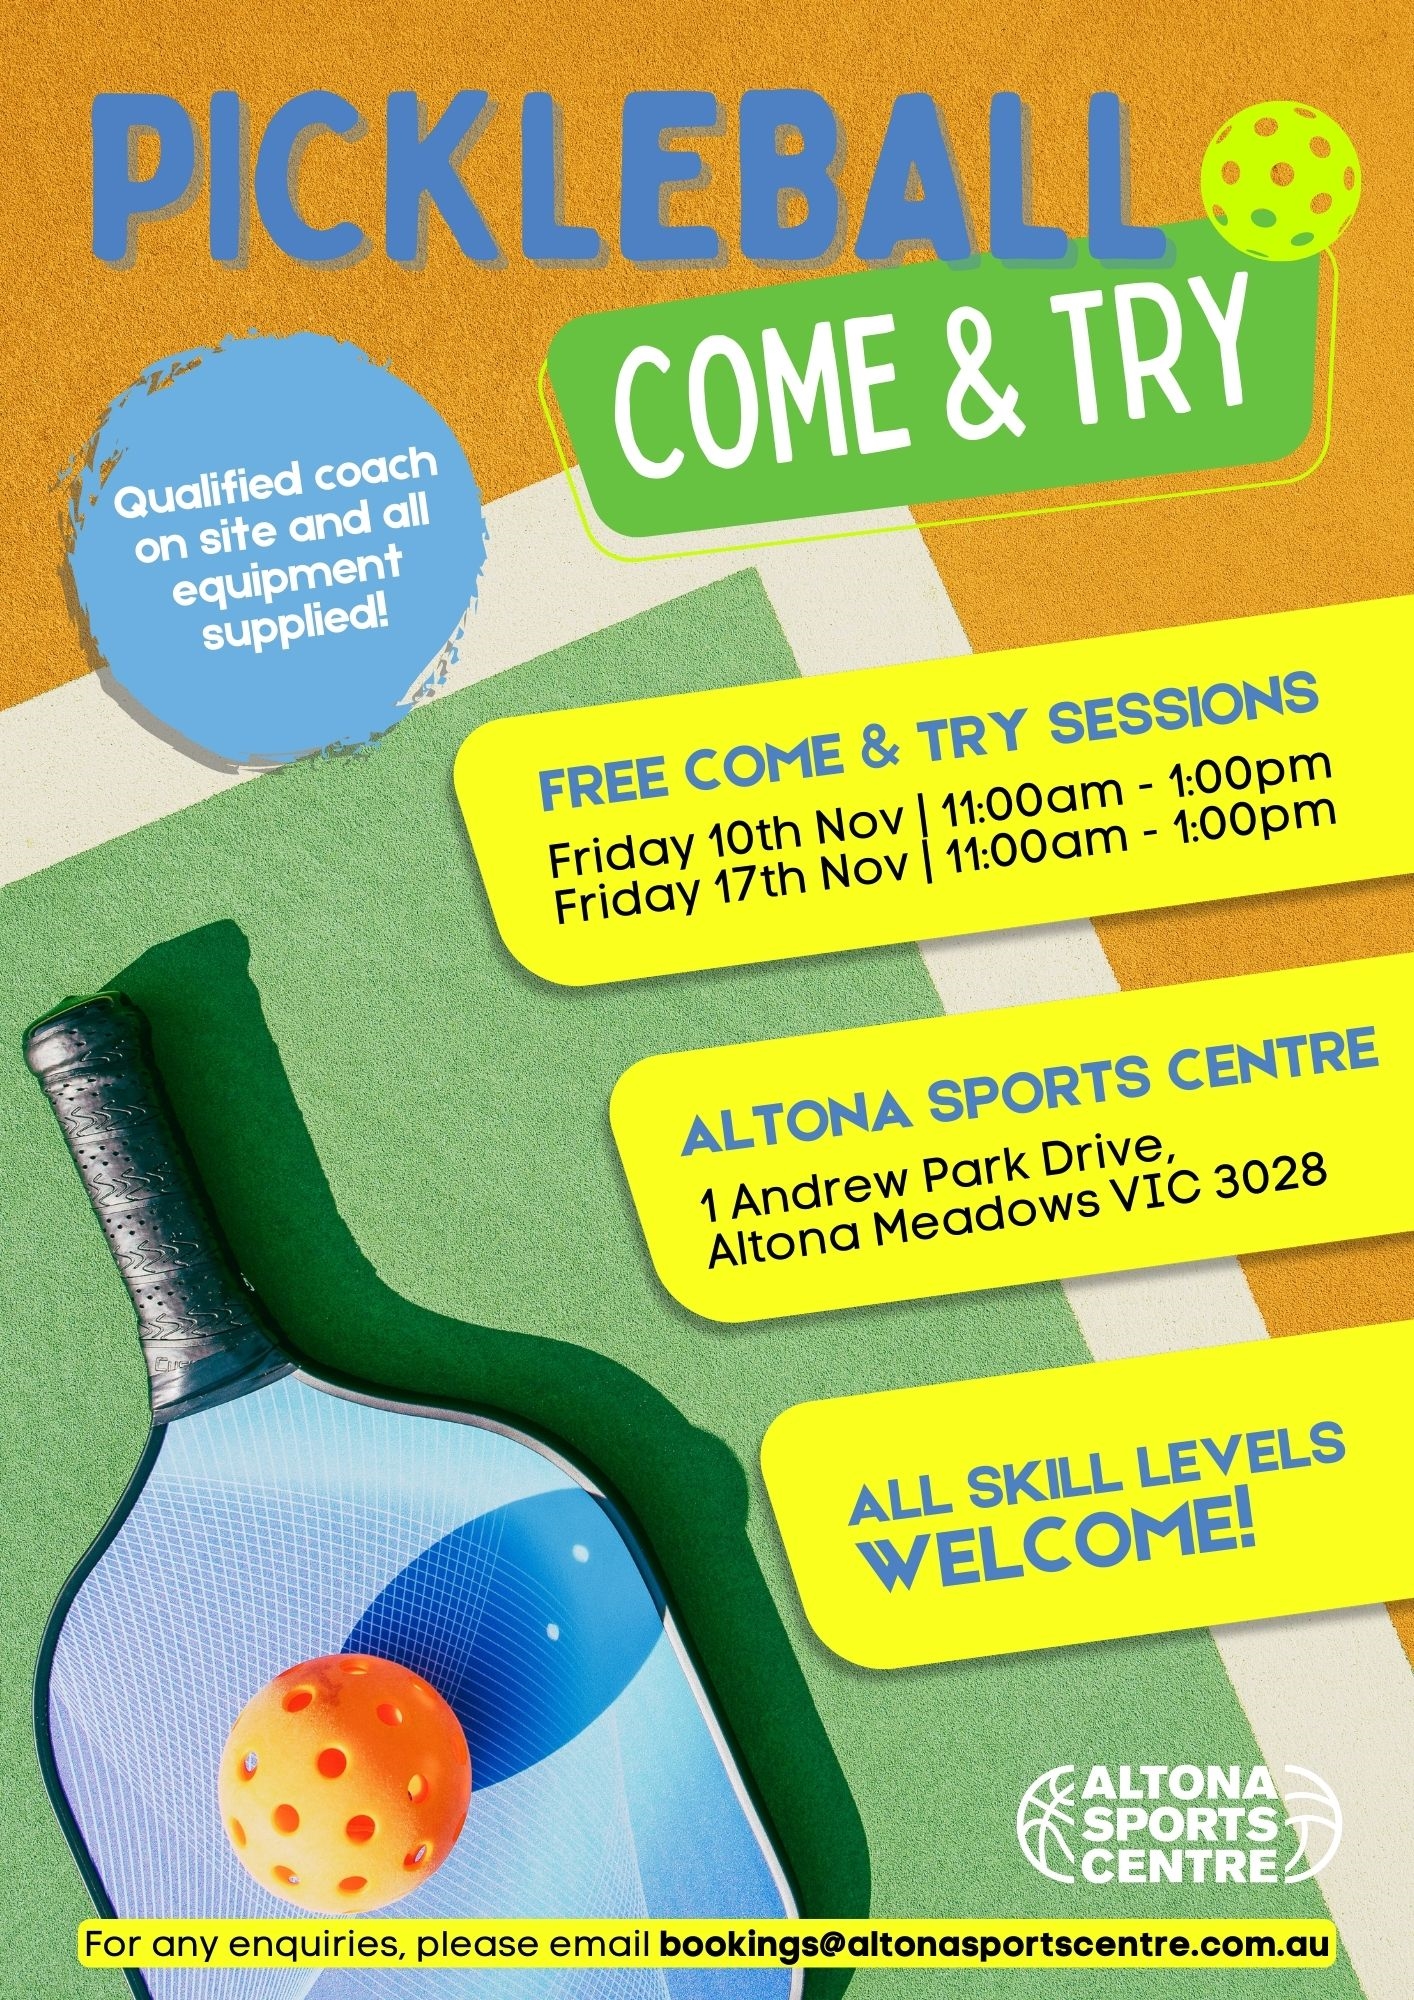 Pickleball Come & Try at the Altona Sports Centre Visit Hobsons Bay